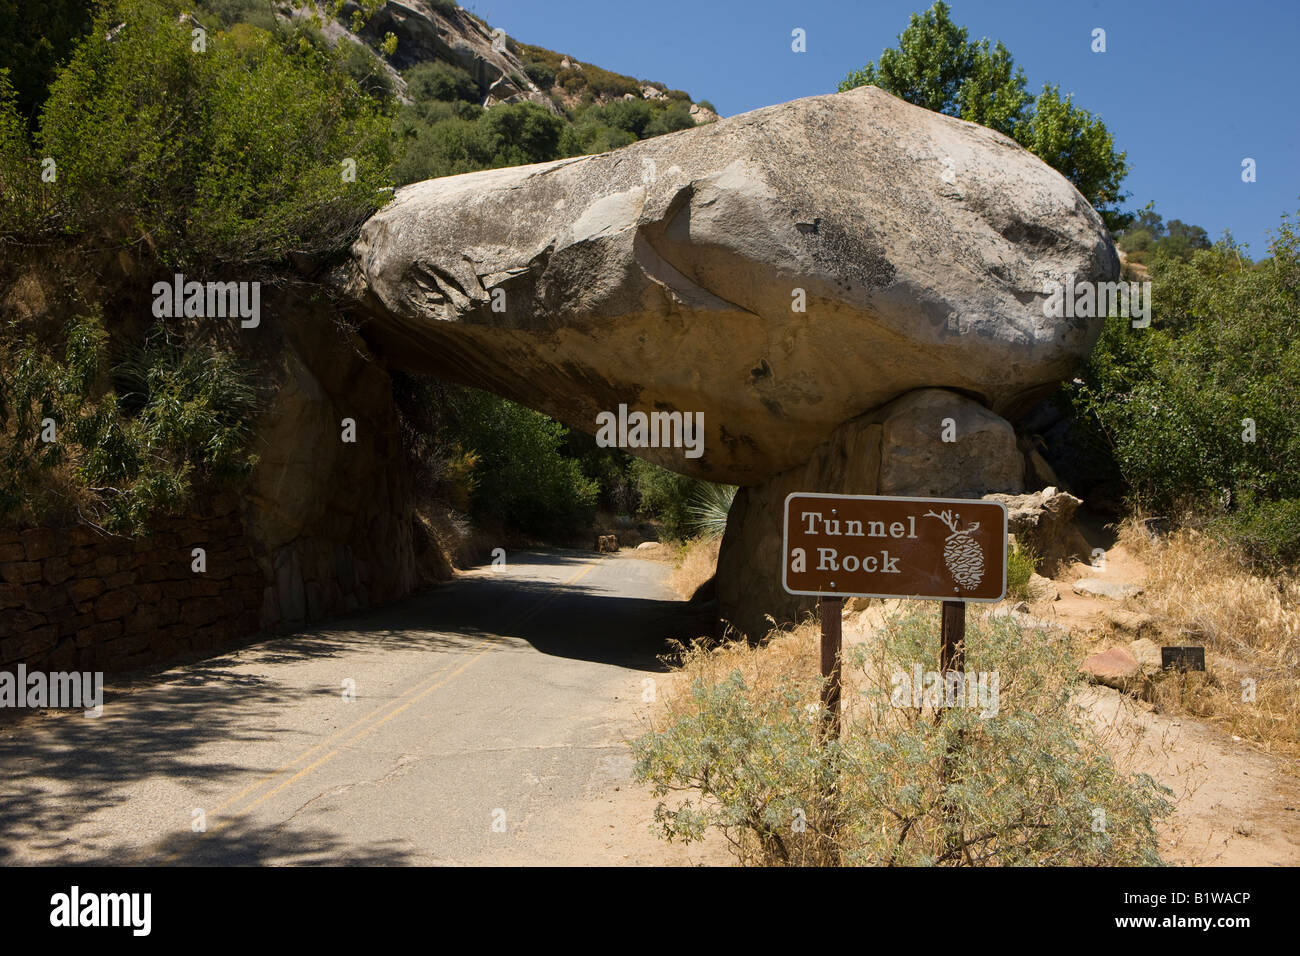 Tunnel Rock, along side the Generals Highway, Sequoia National Park, California, United States of America Stock Photo